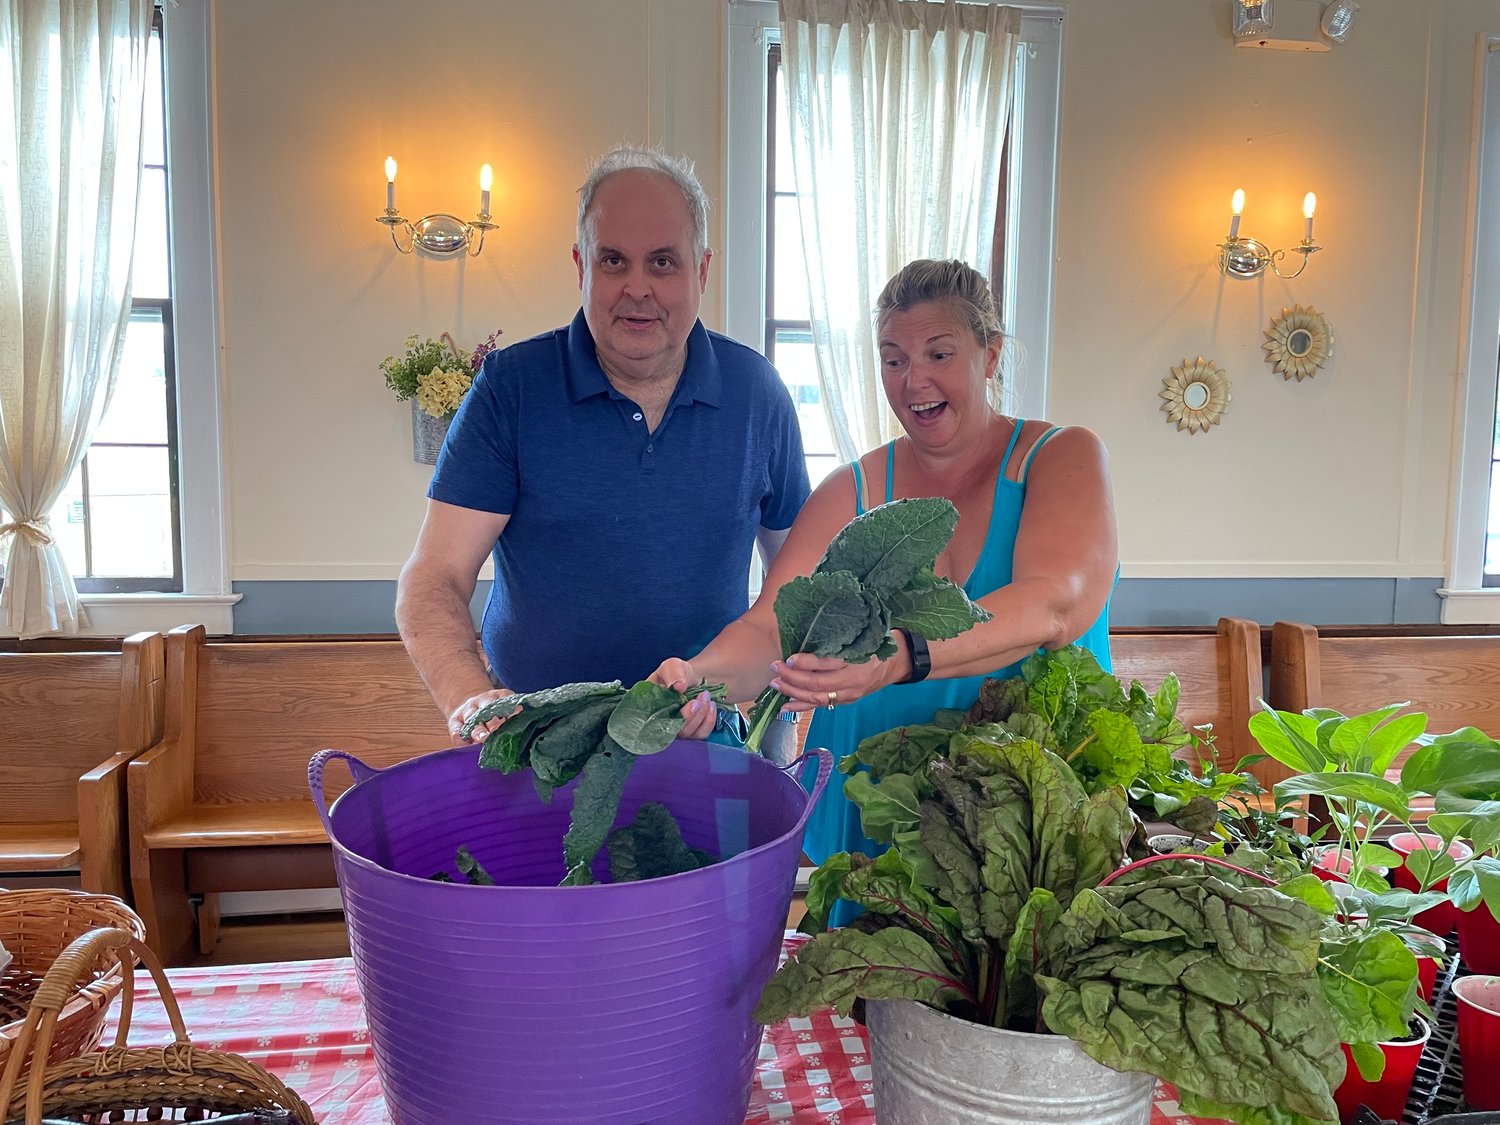 Volunteers Carl Bucking, left, and Jennifer Henning showed off some of the garden’s fresh produce.